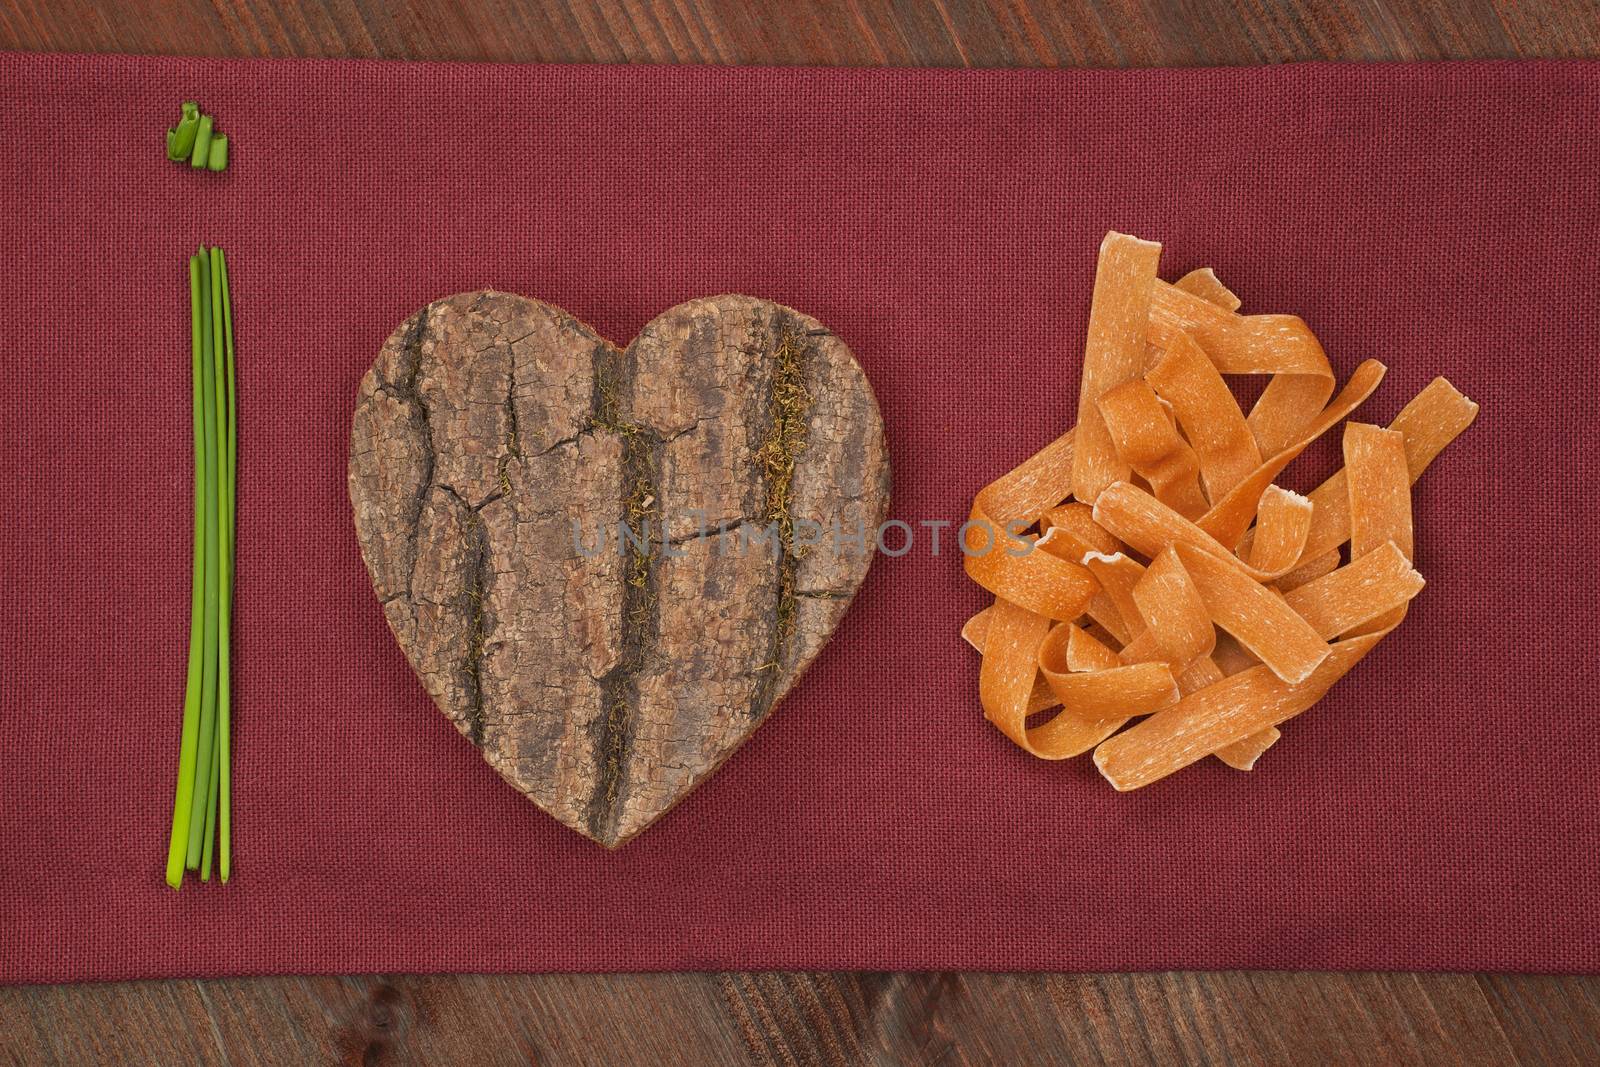 I love pasta made of chive, wooden heart and pasta on burgundy cloth. Healthy eating background.